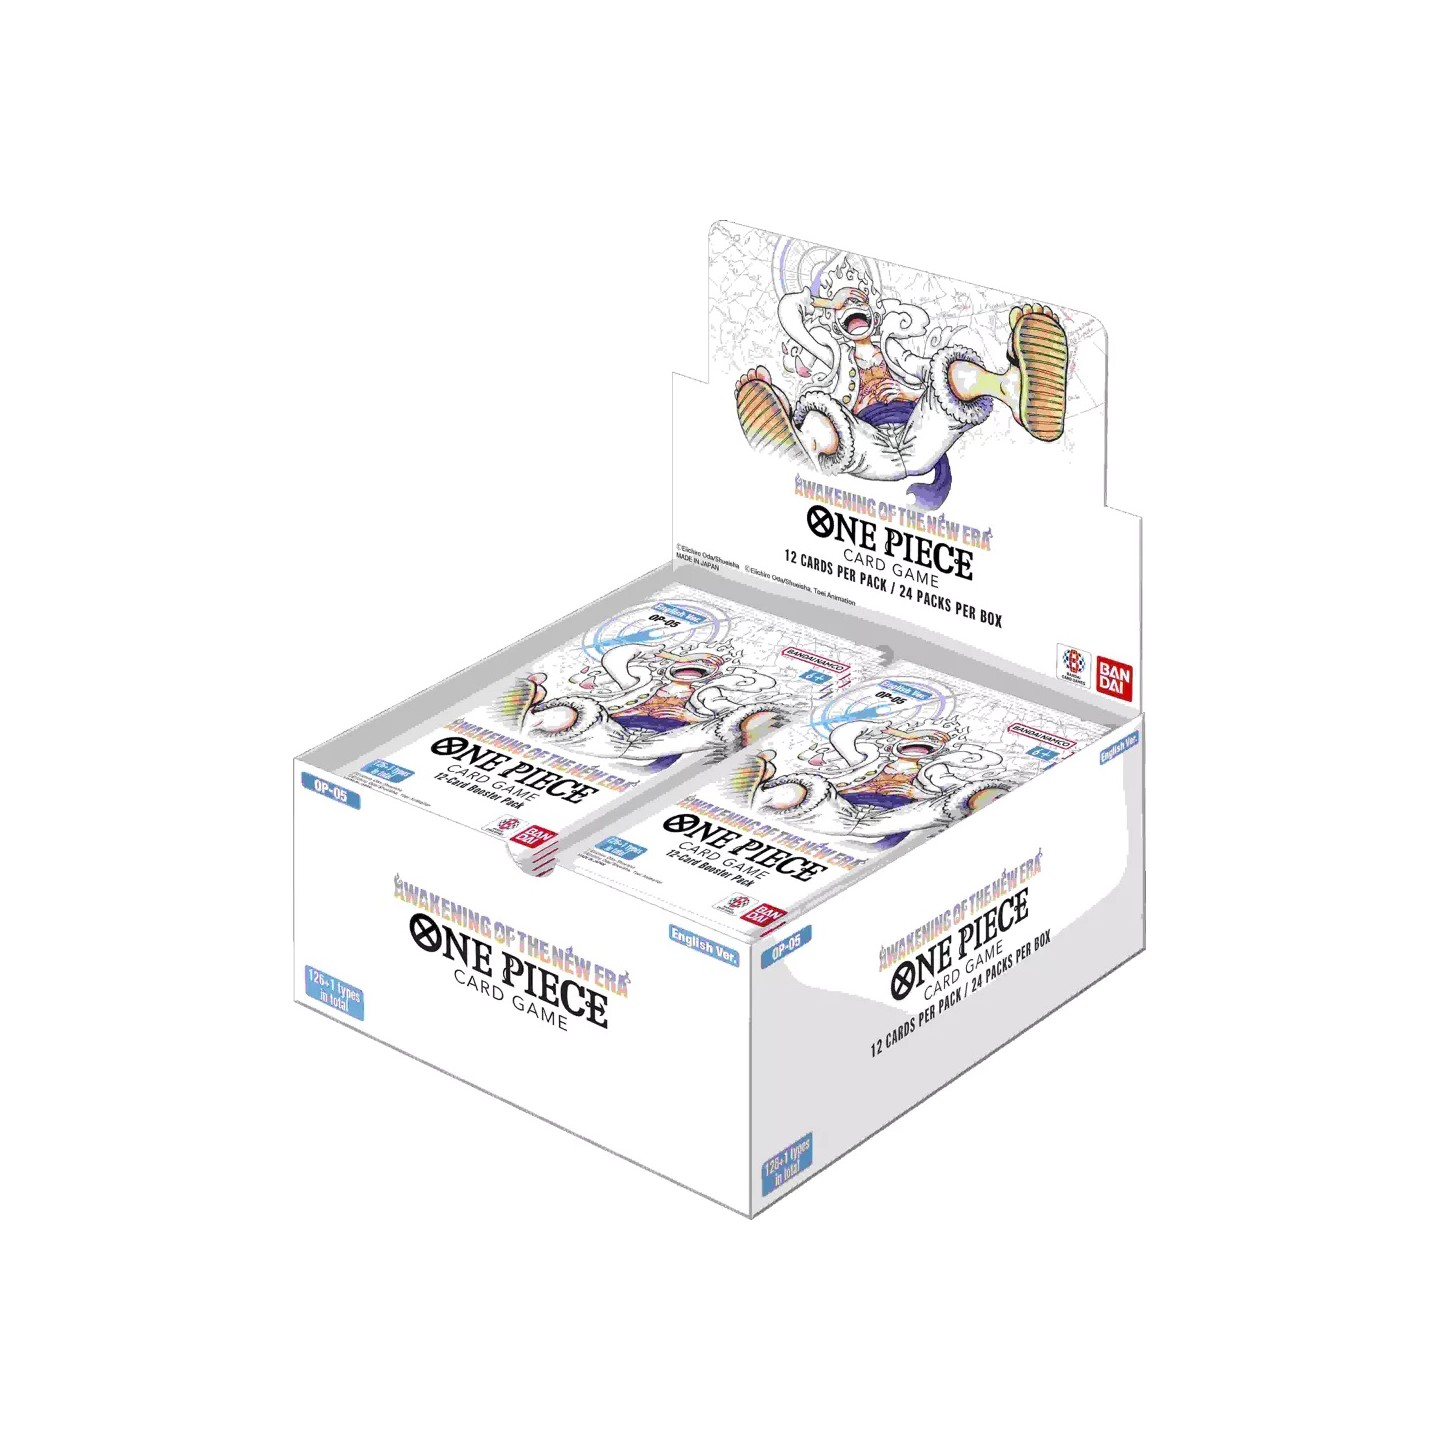 Calendrier des sorties One Piece card game 2023 - Le Coin Des Barons